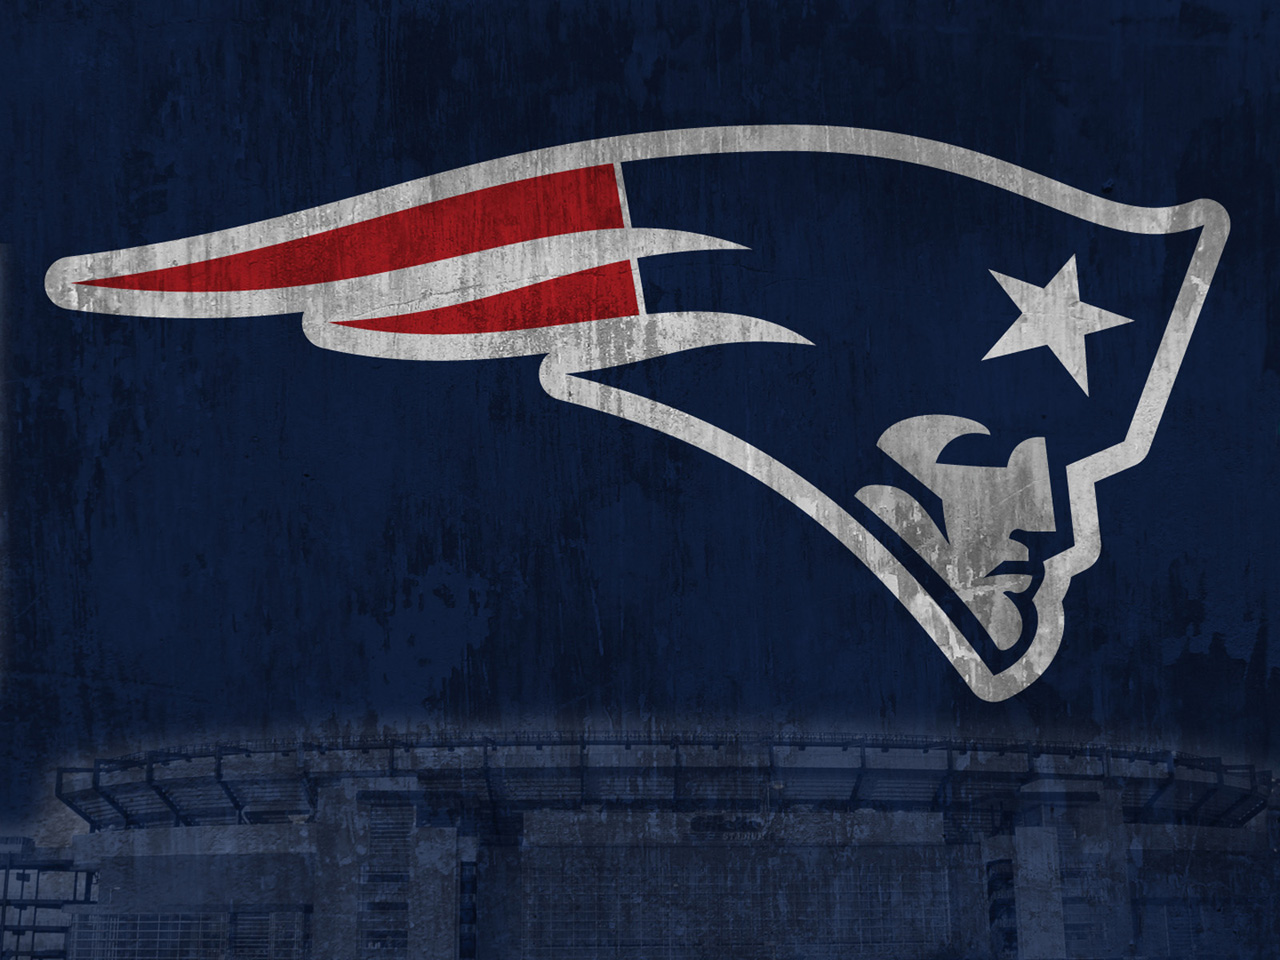 Some nice game action Patriots wallpapers. See them all at Boston.com.